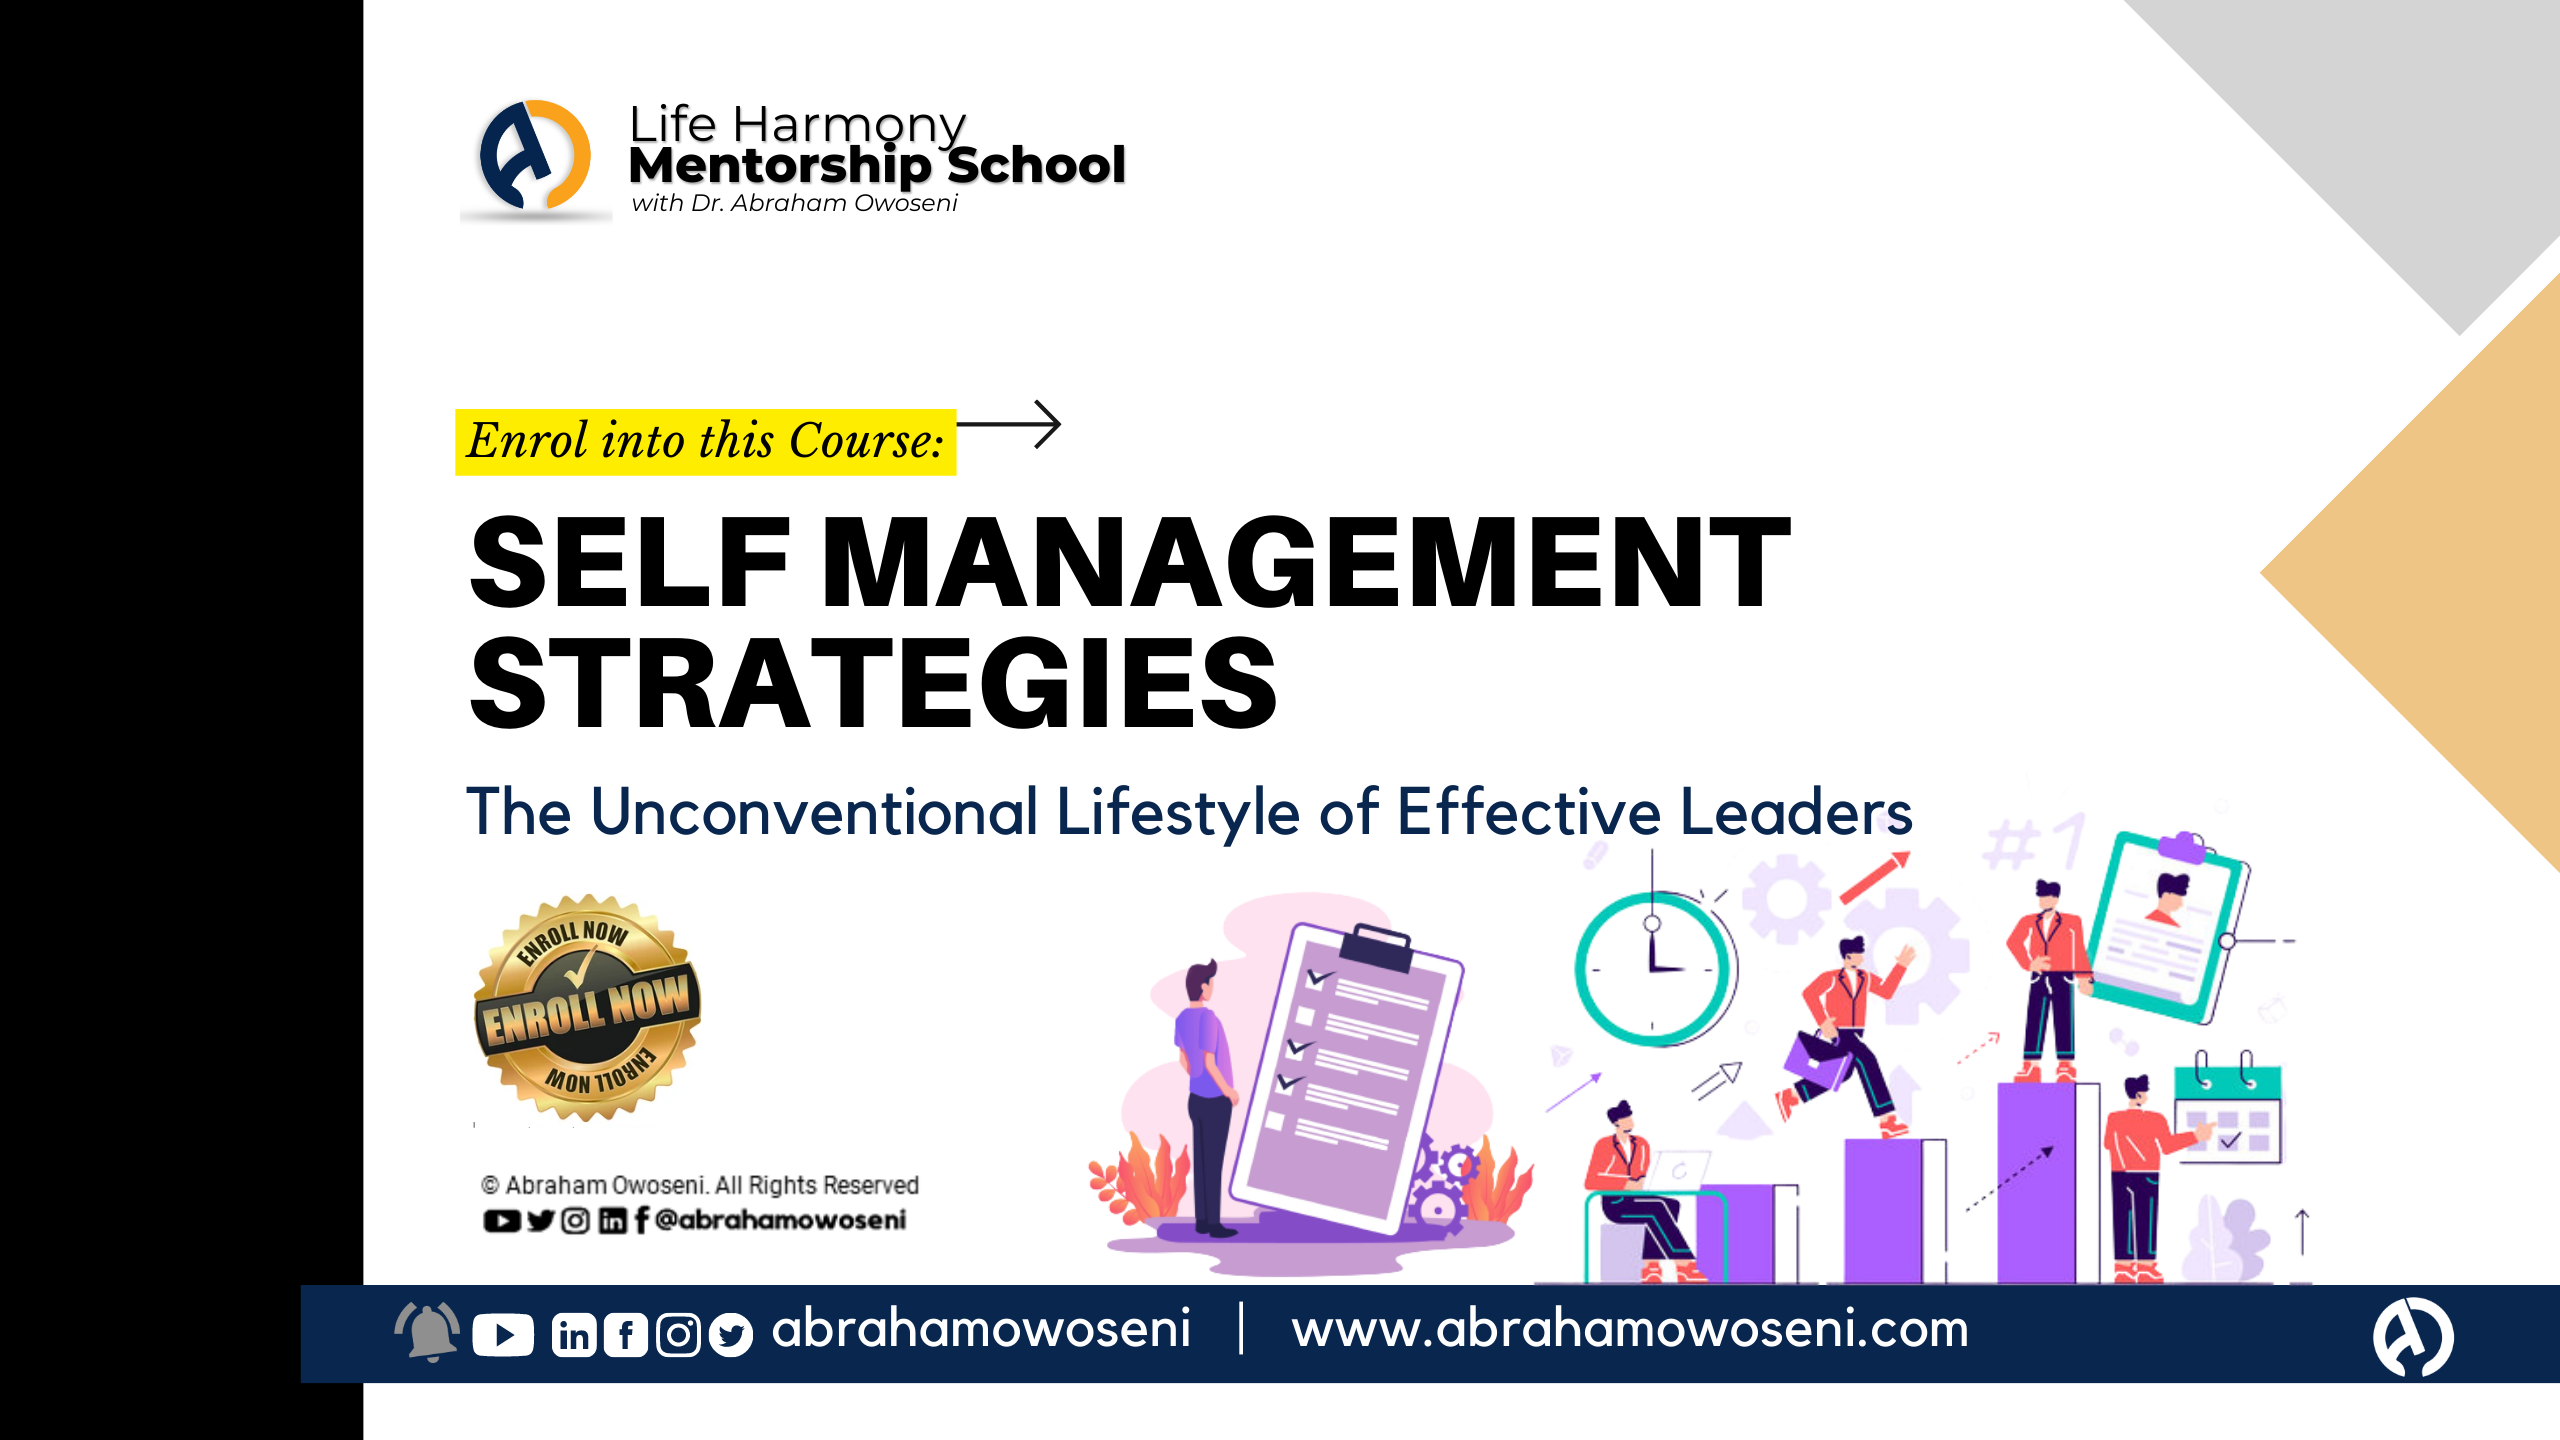 Self-Management Strategies: The Unconventional Lifestyle of Effective Leaders